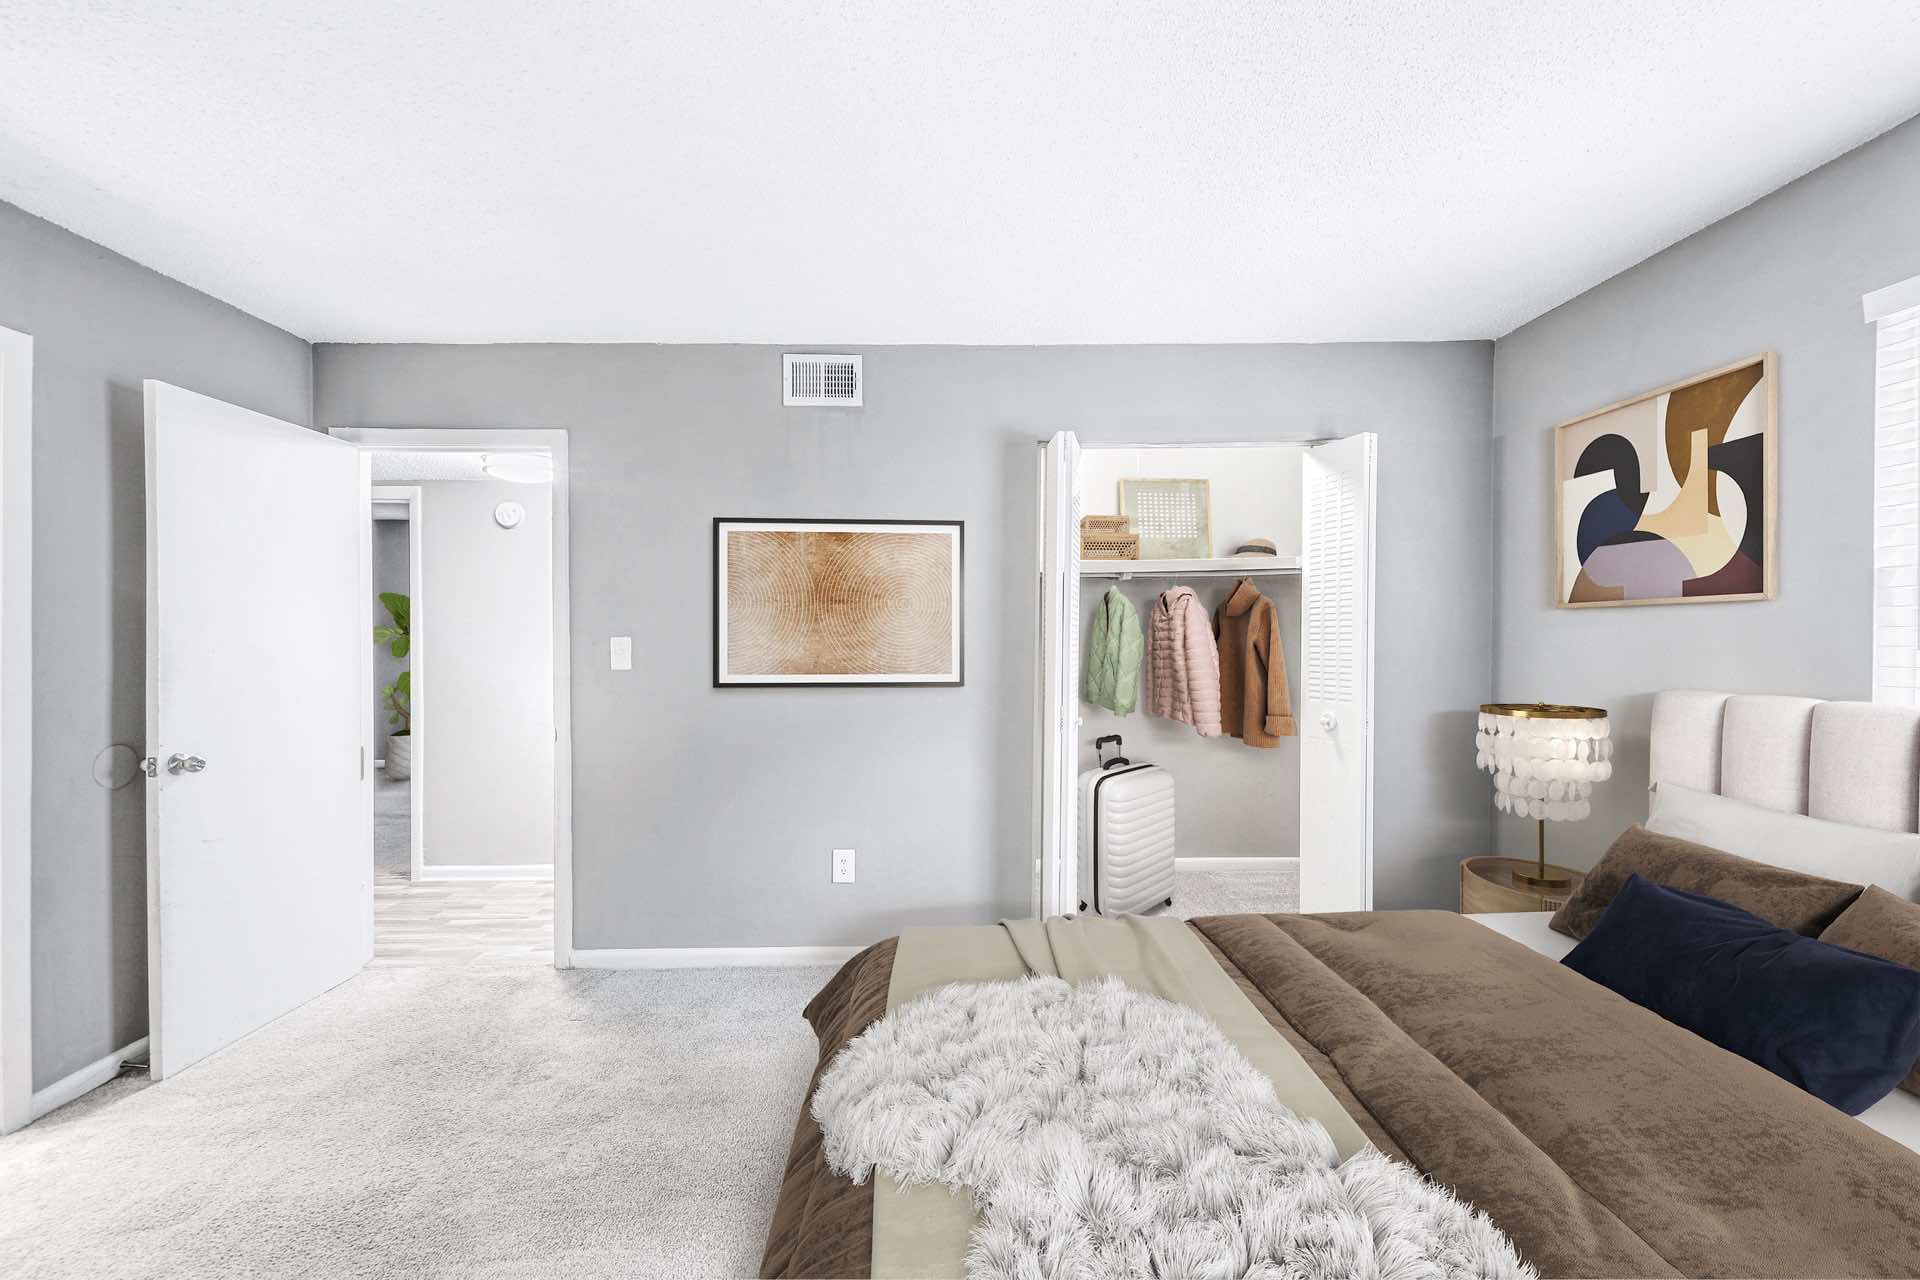 bedroom with natural lighting, plush carpeting, and walk-in closet